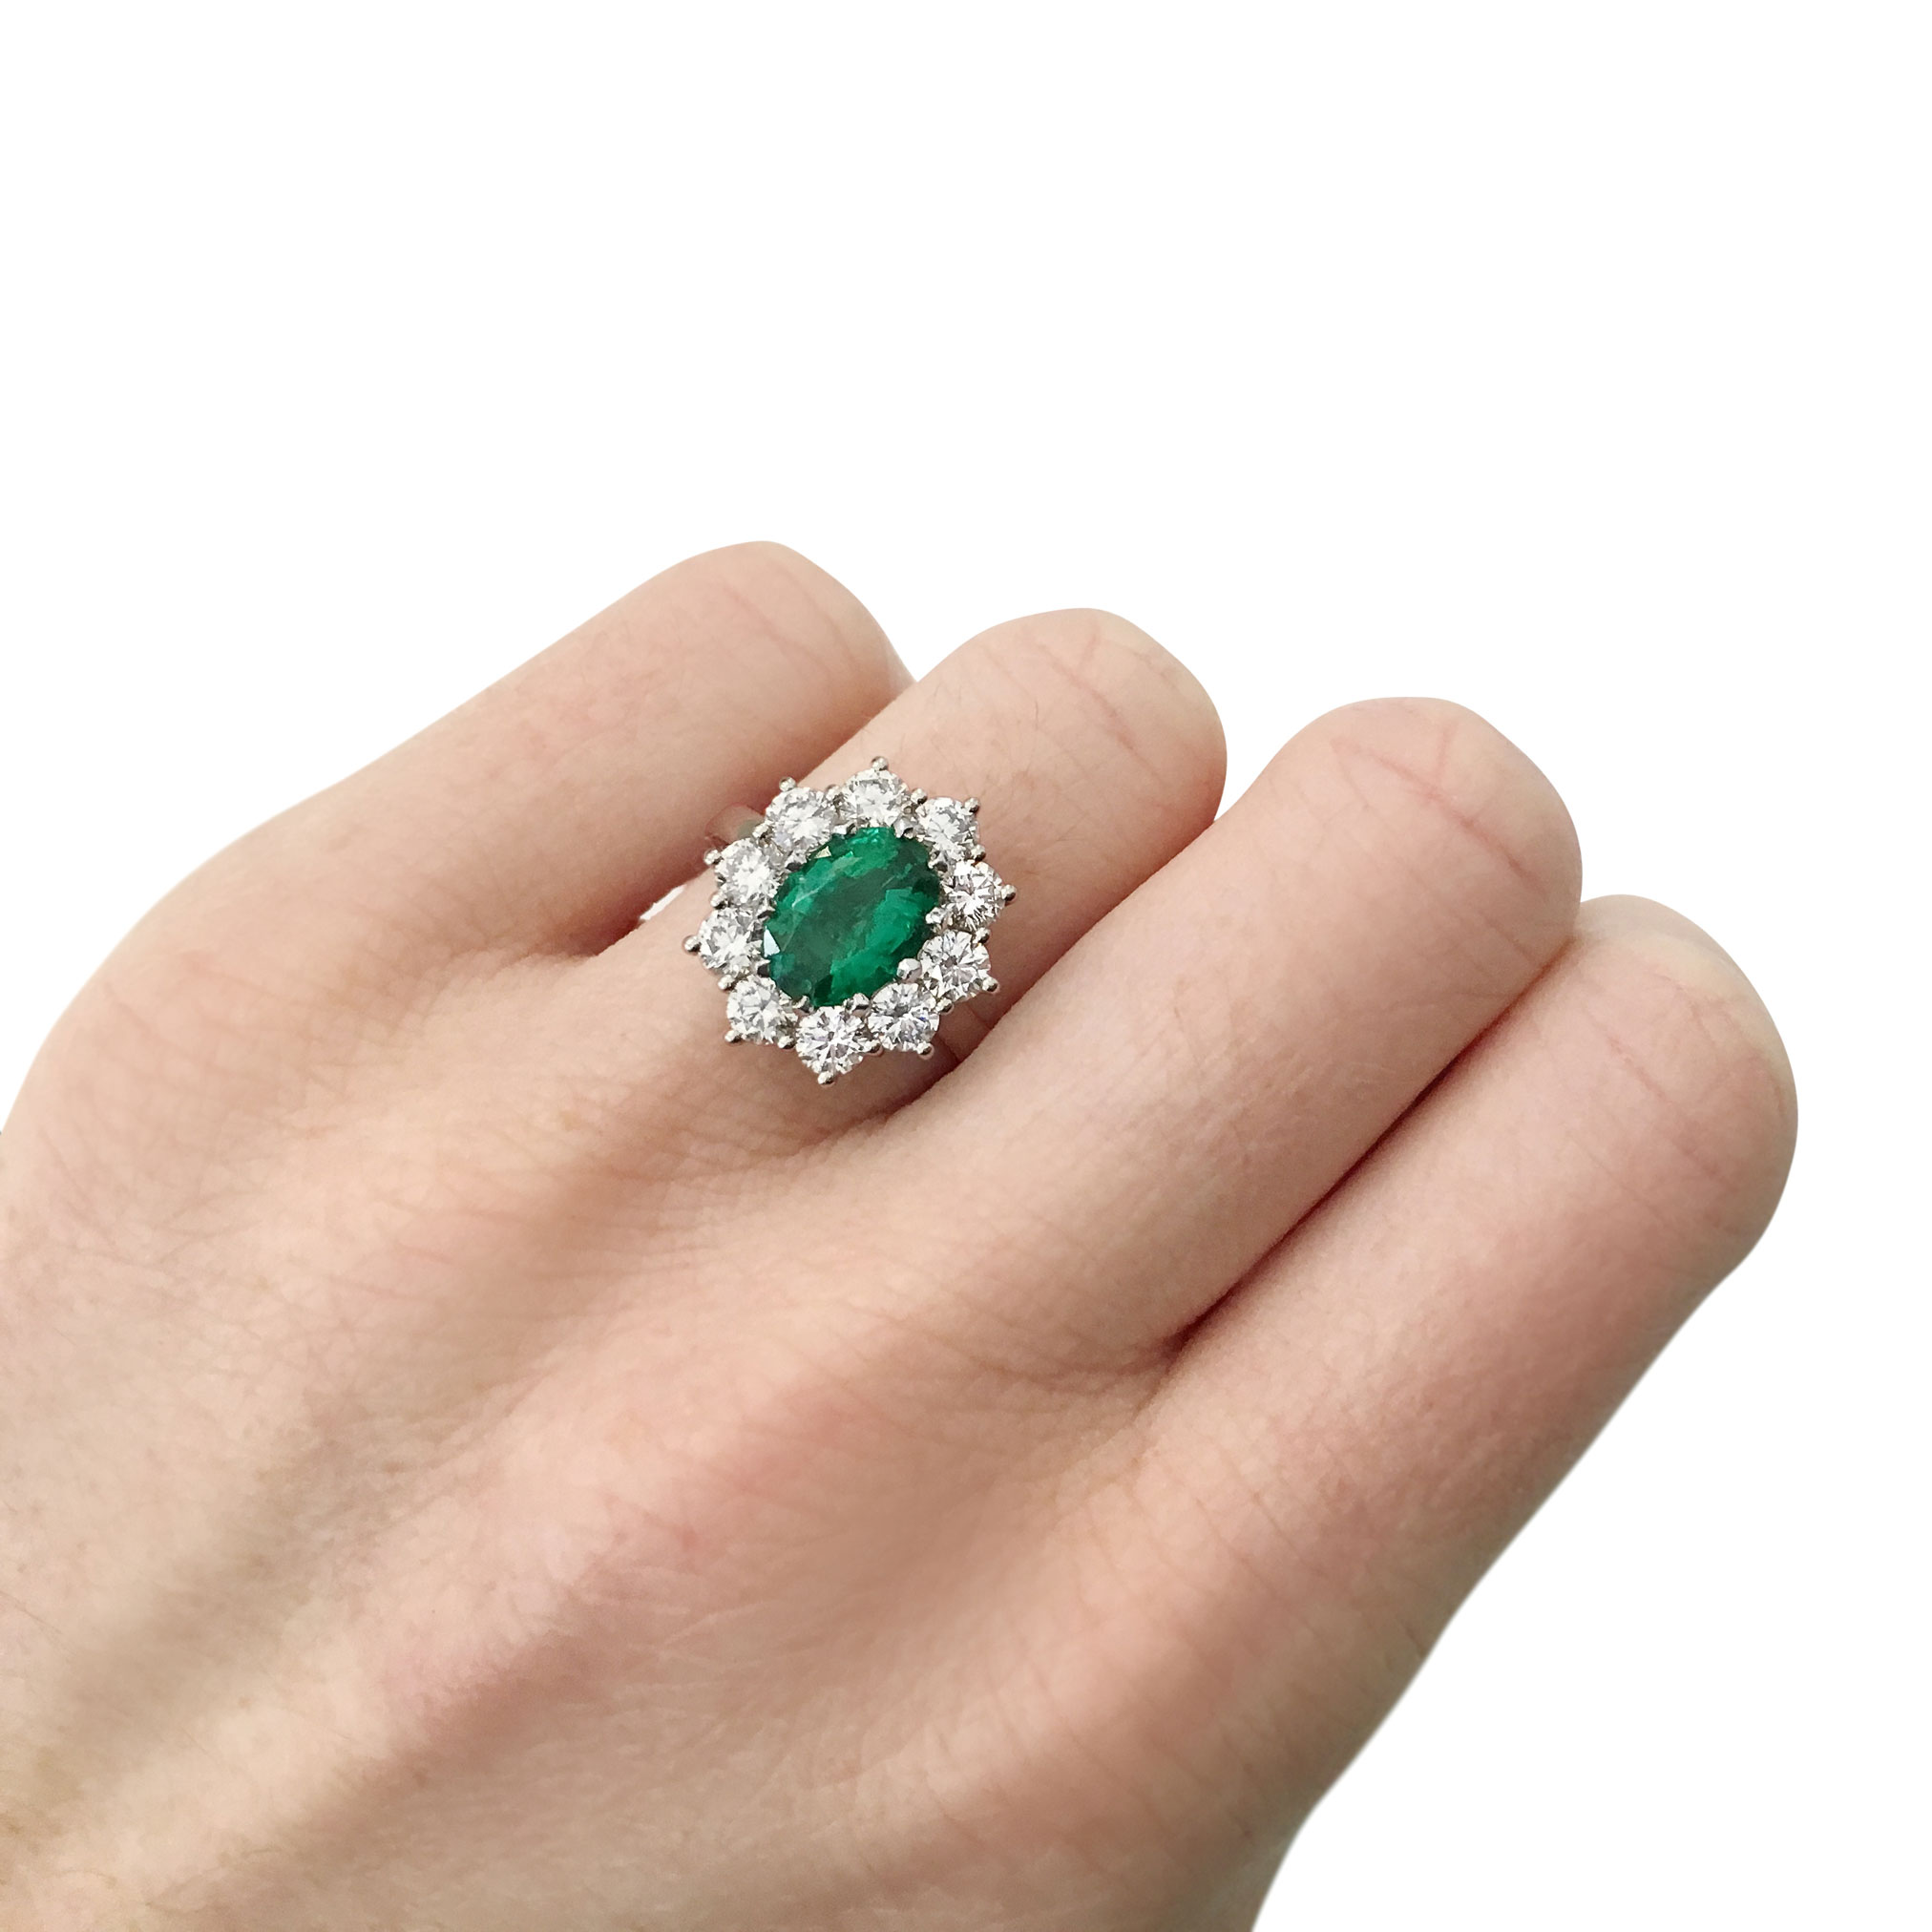 Oval emerald with diamond halo engagement ring, mounted in platinum. 